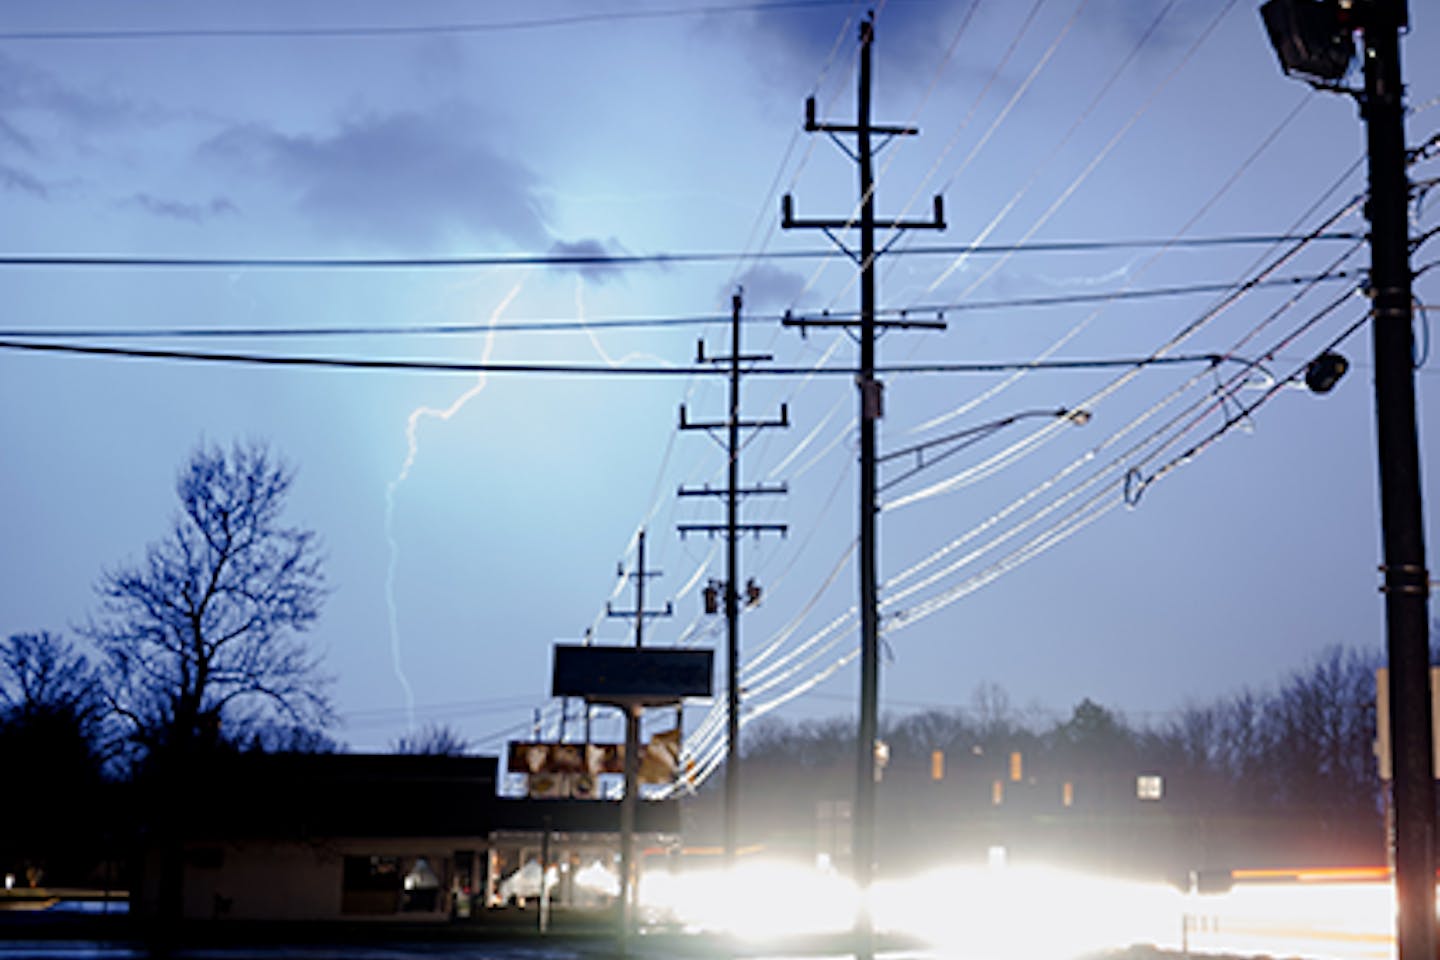 Thunderstorms and electrical outage info in Chattanooga